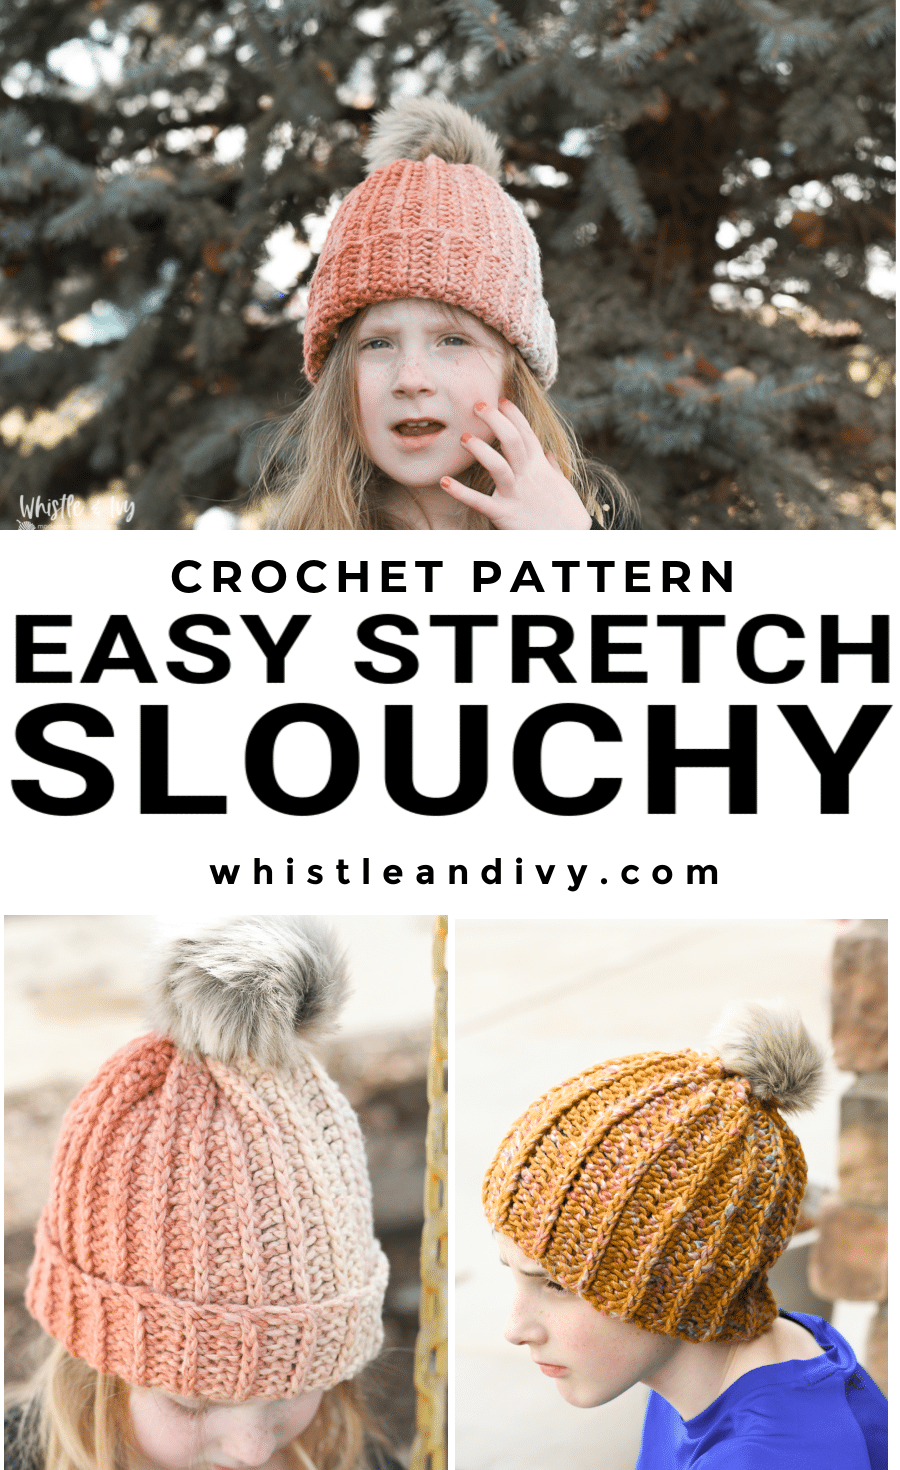 easy ribbed crochet hat pattern for beginners with lots of sizes, use any yarn to make this hat